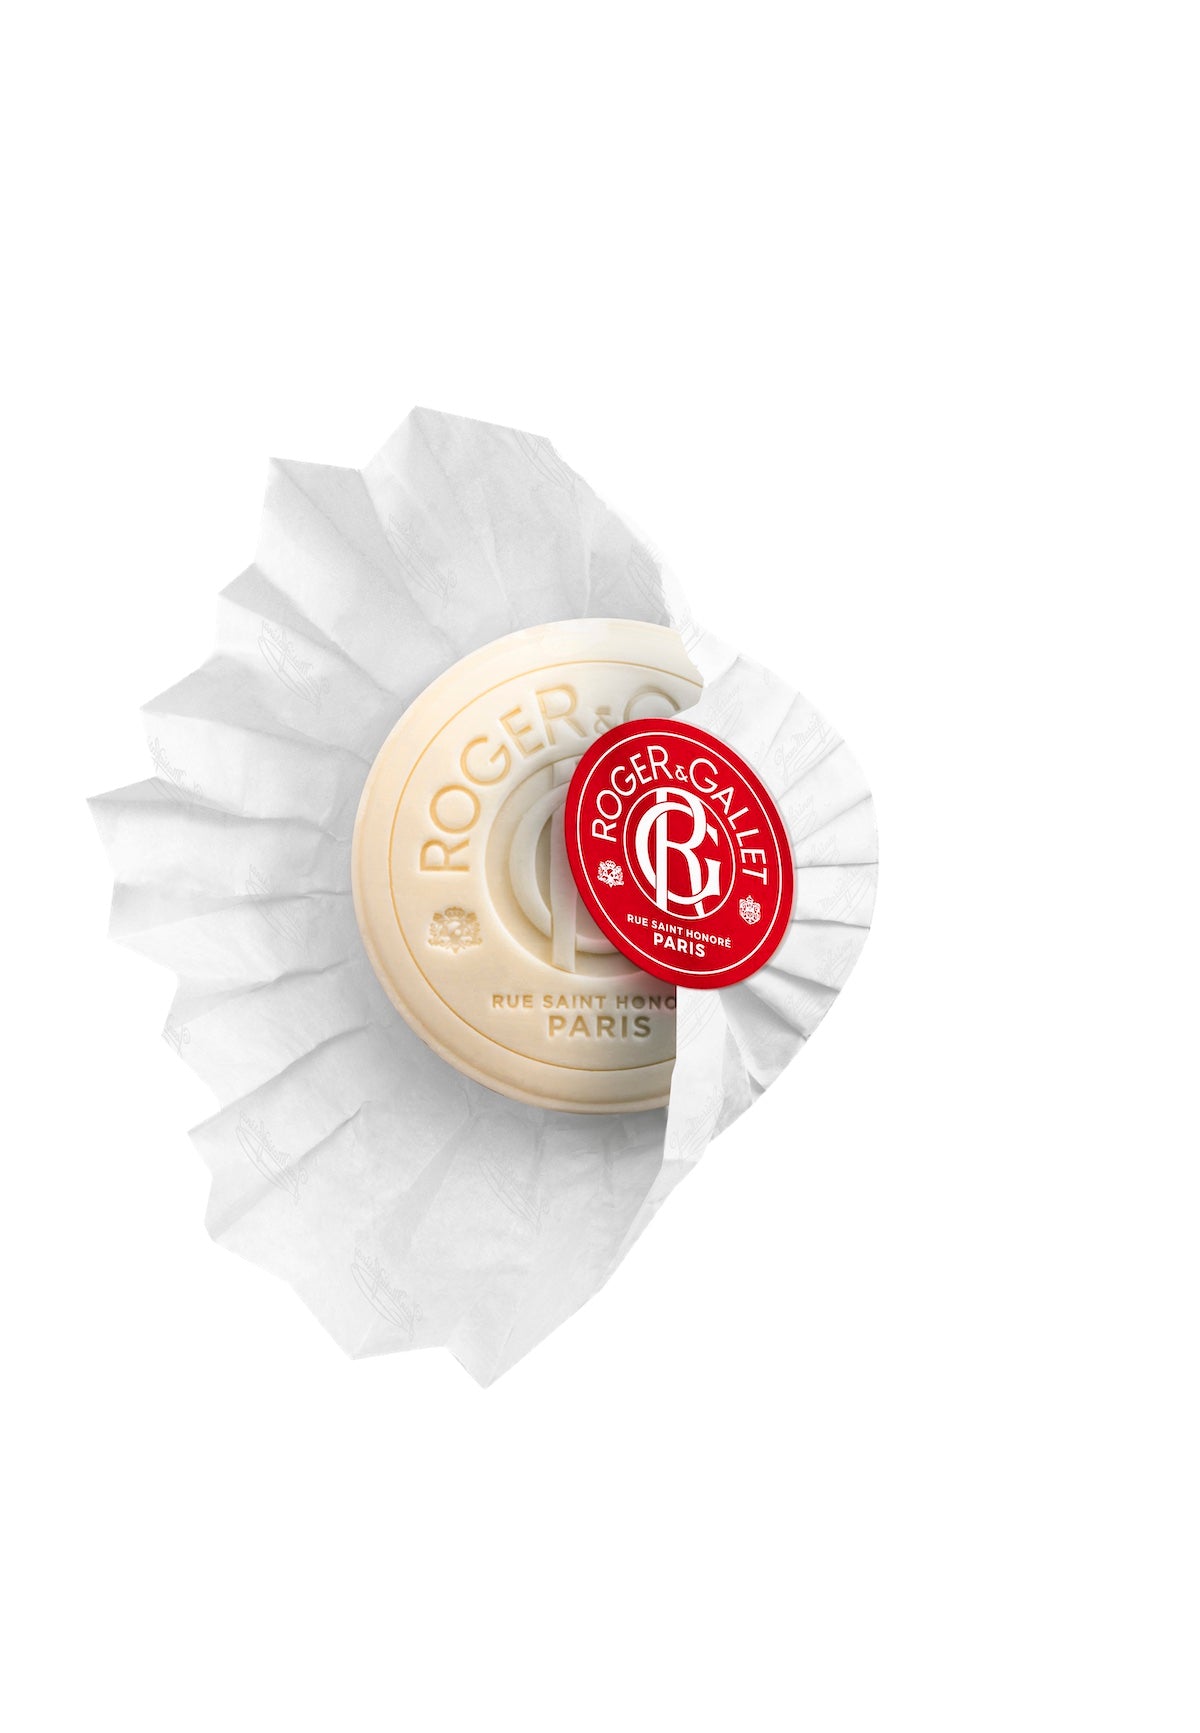 A Roger & Gallet Jean Marie Farina perfumed soap in white and red packaging, displayed against a black background. The soap is circular, segmented.